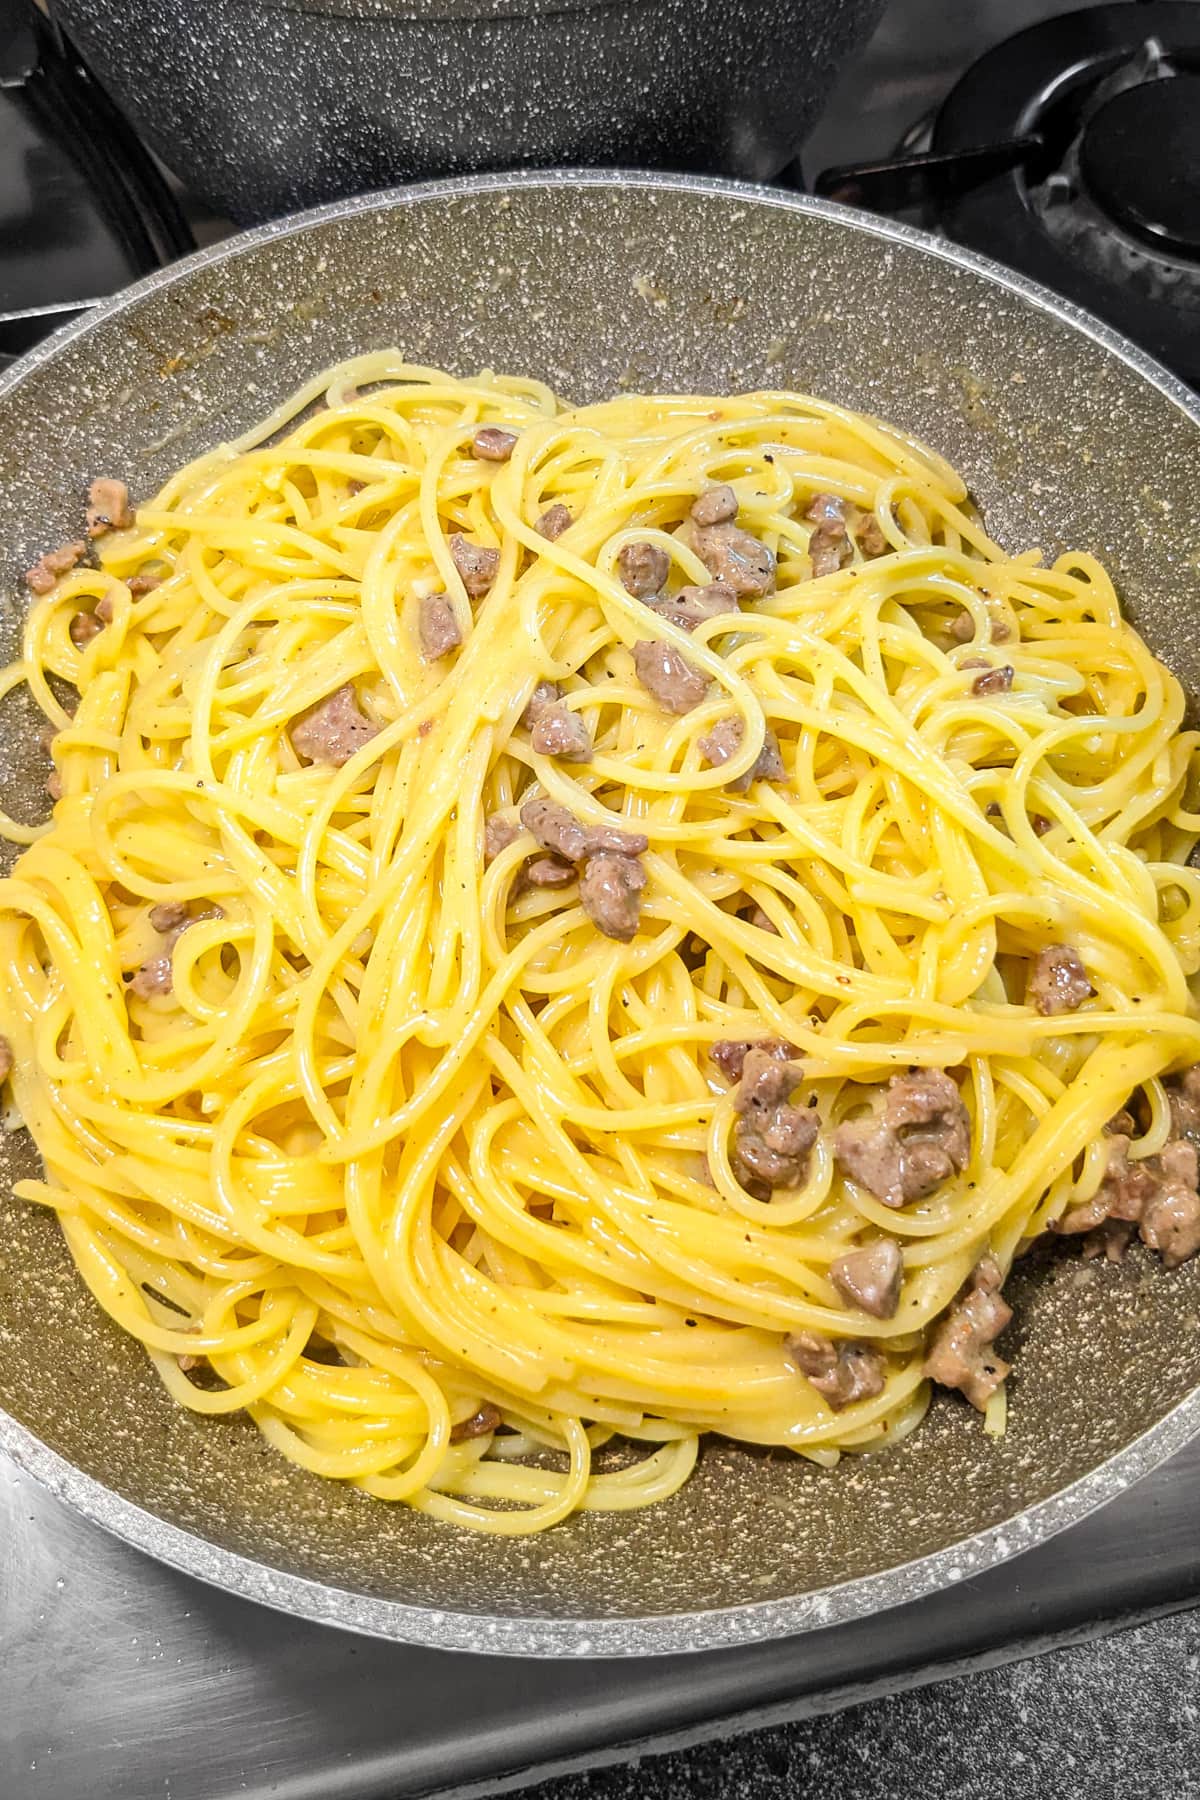 Beef carbonara in a sauce pan on the stove.